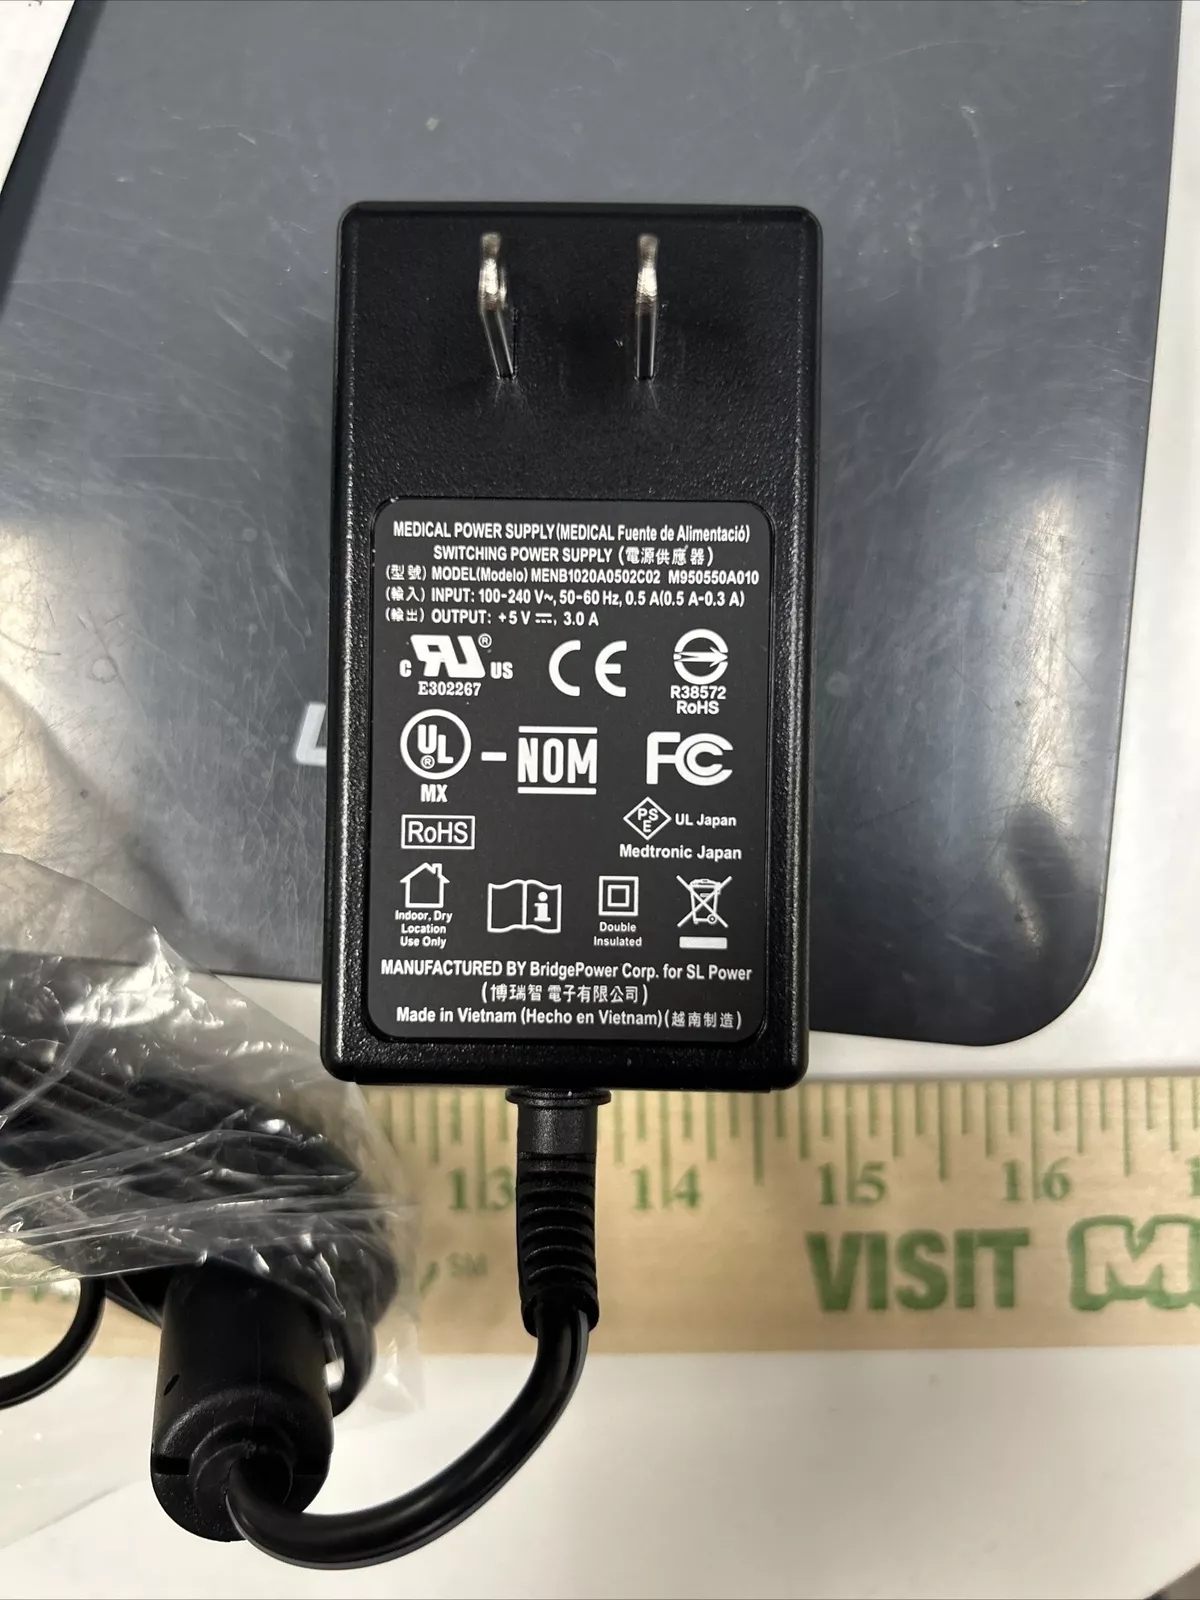 *Brand NEW*Genuine Medical 5V 3A 15W AC-DC Adapter Power Supply Wide Range MENB1020A0502C02